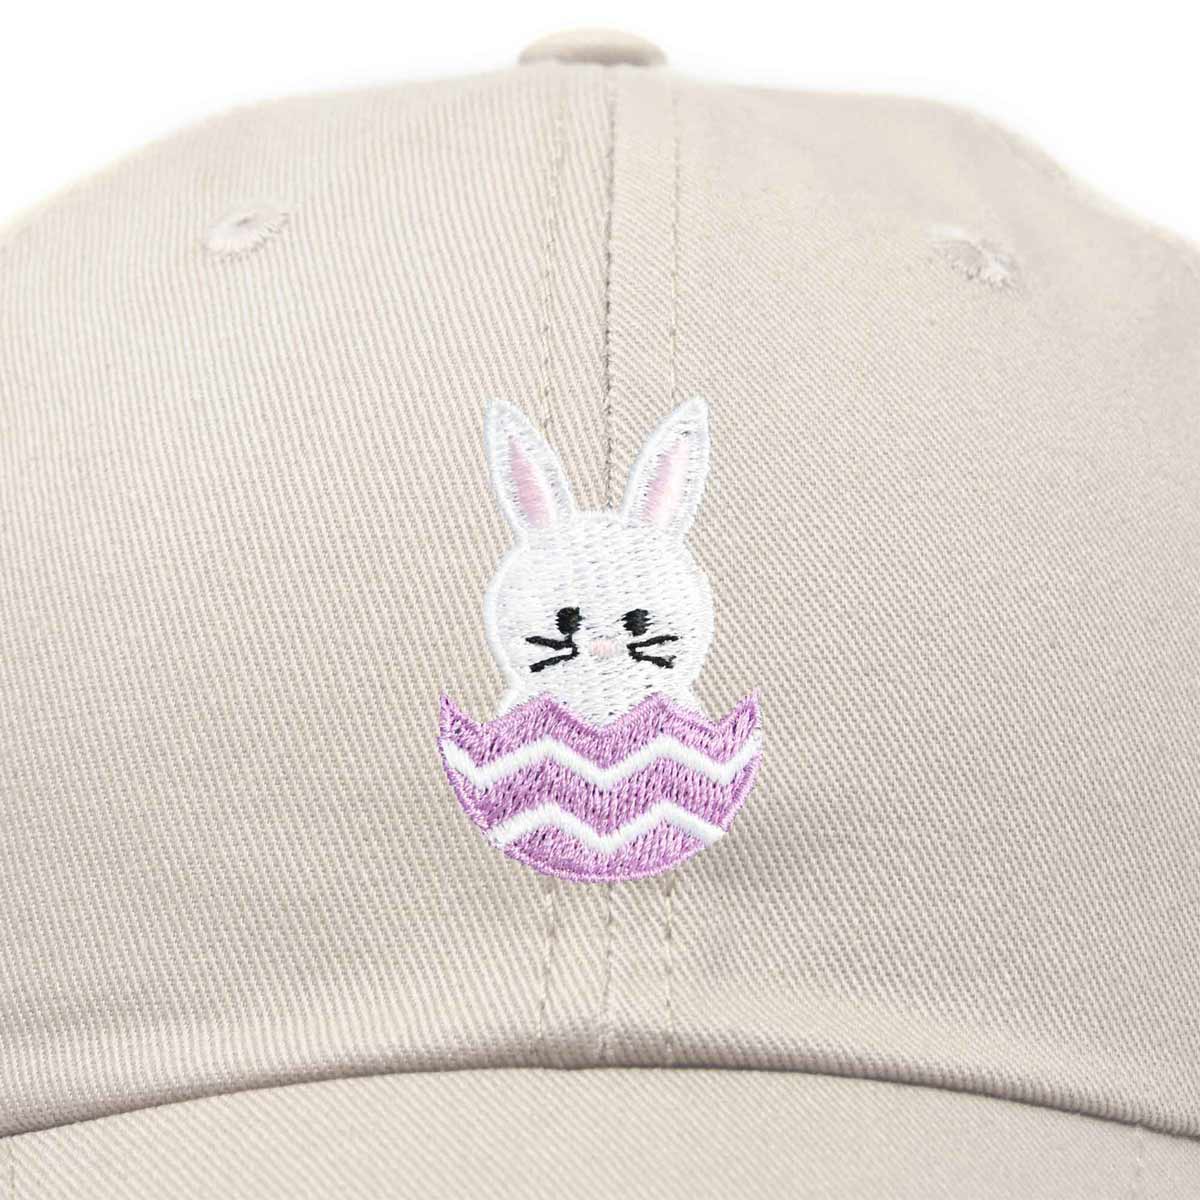 Dalix Easter Bunny Hat